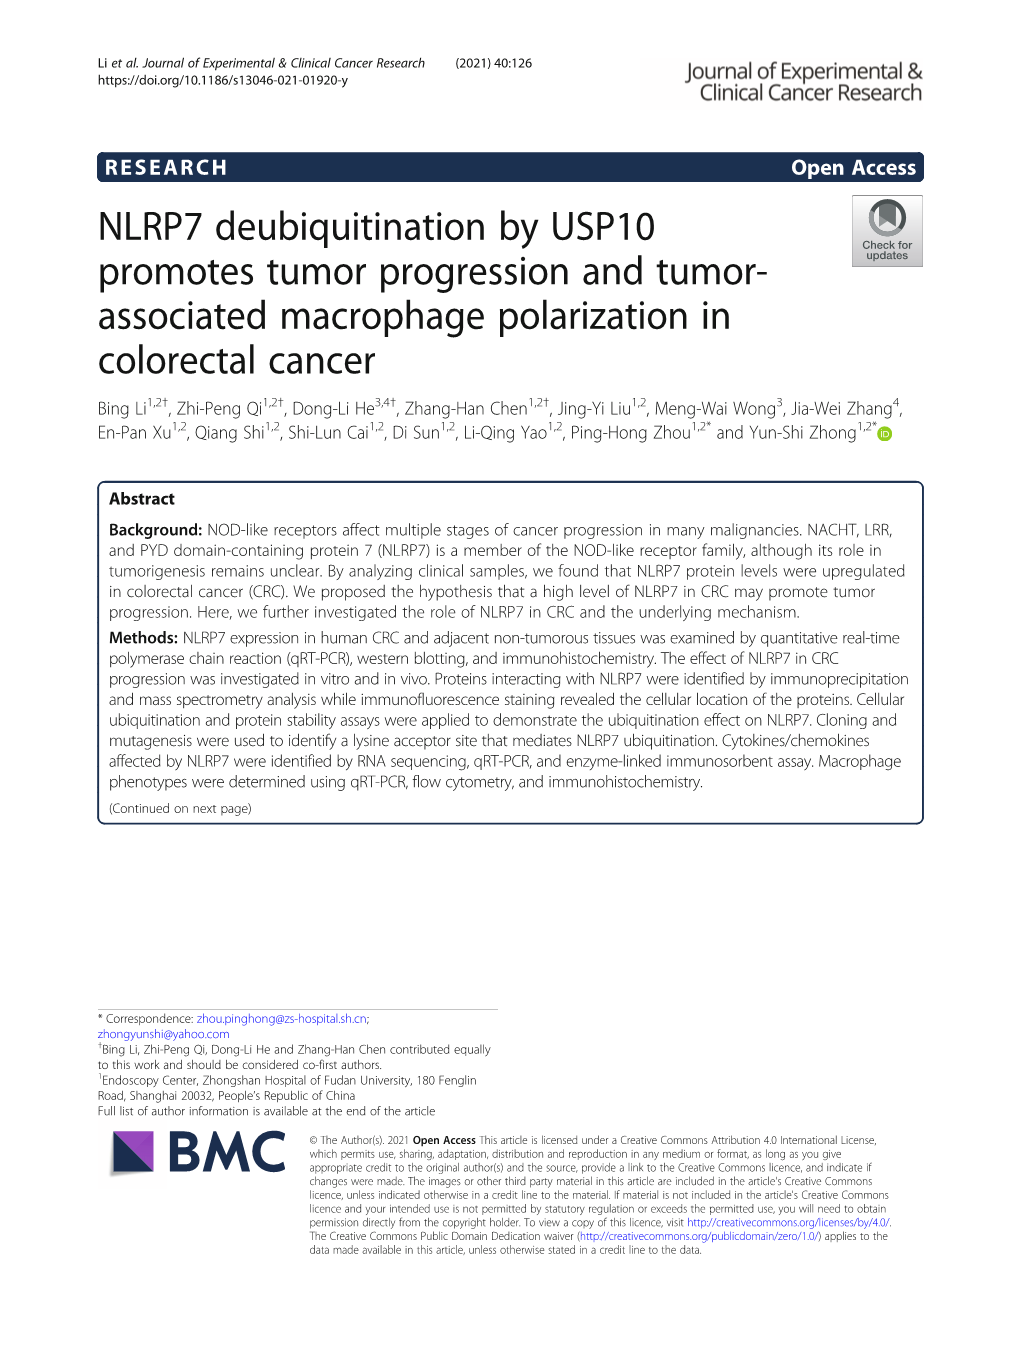 NLRP7 Deubiquitination by USP10 Promotes Tumor Progression And